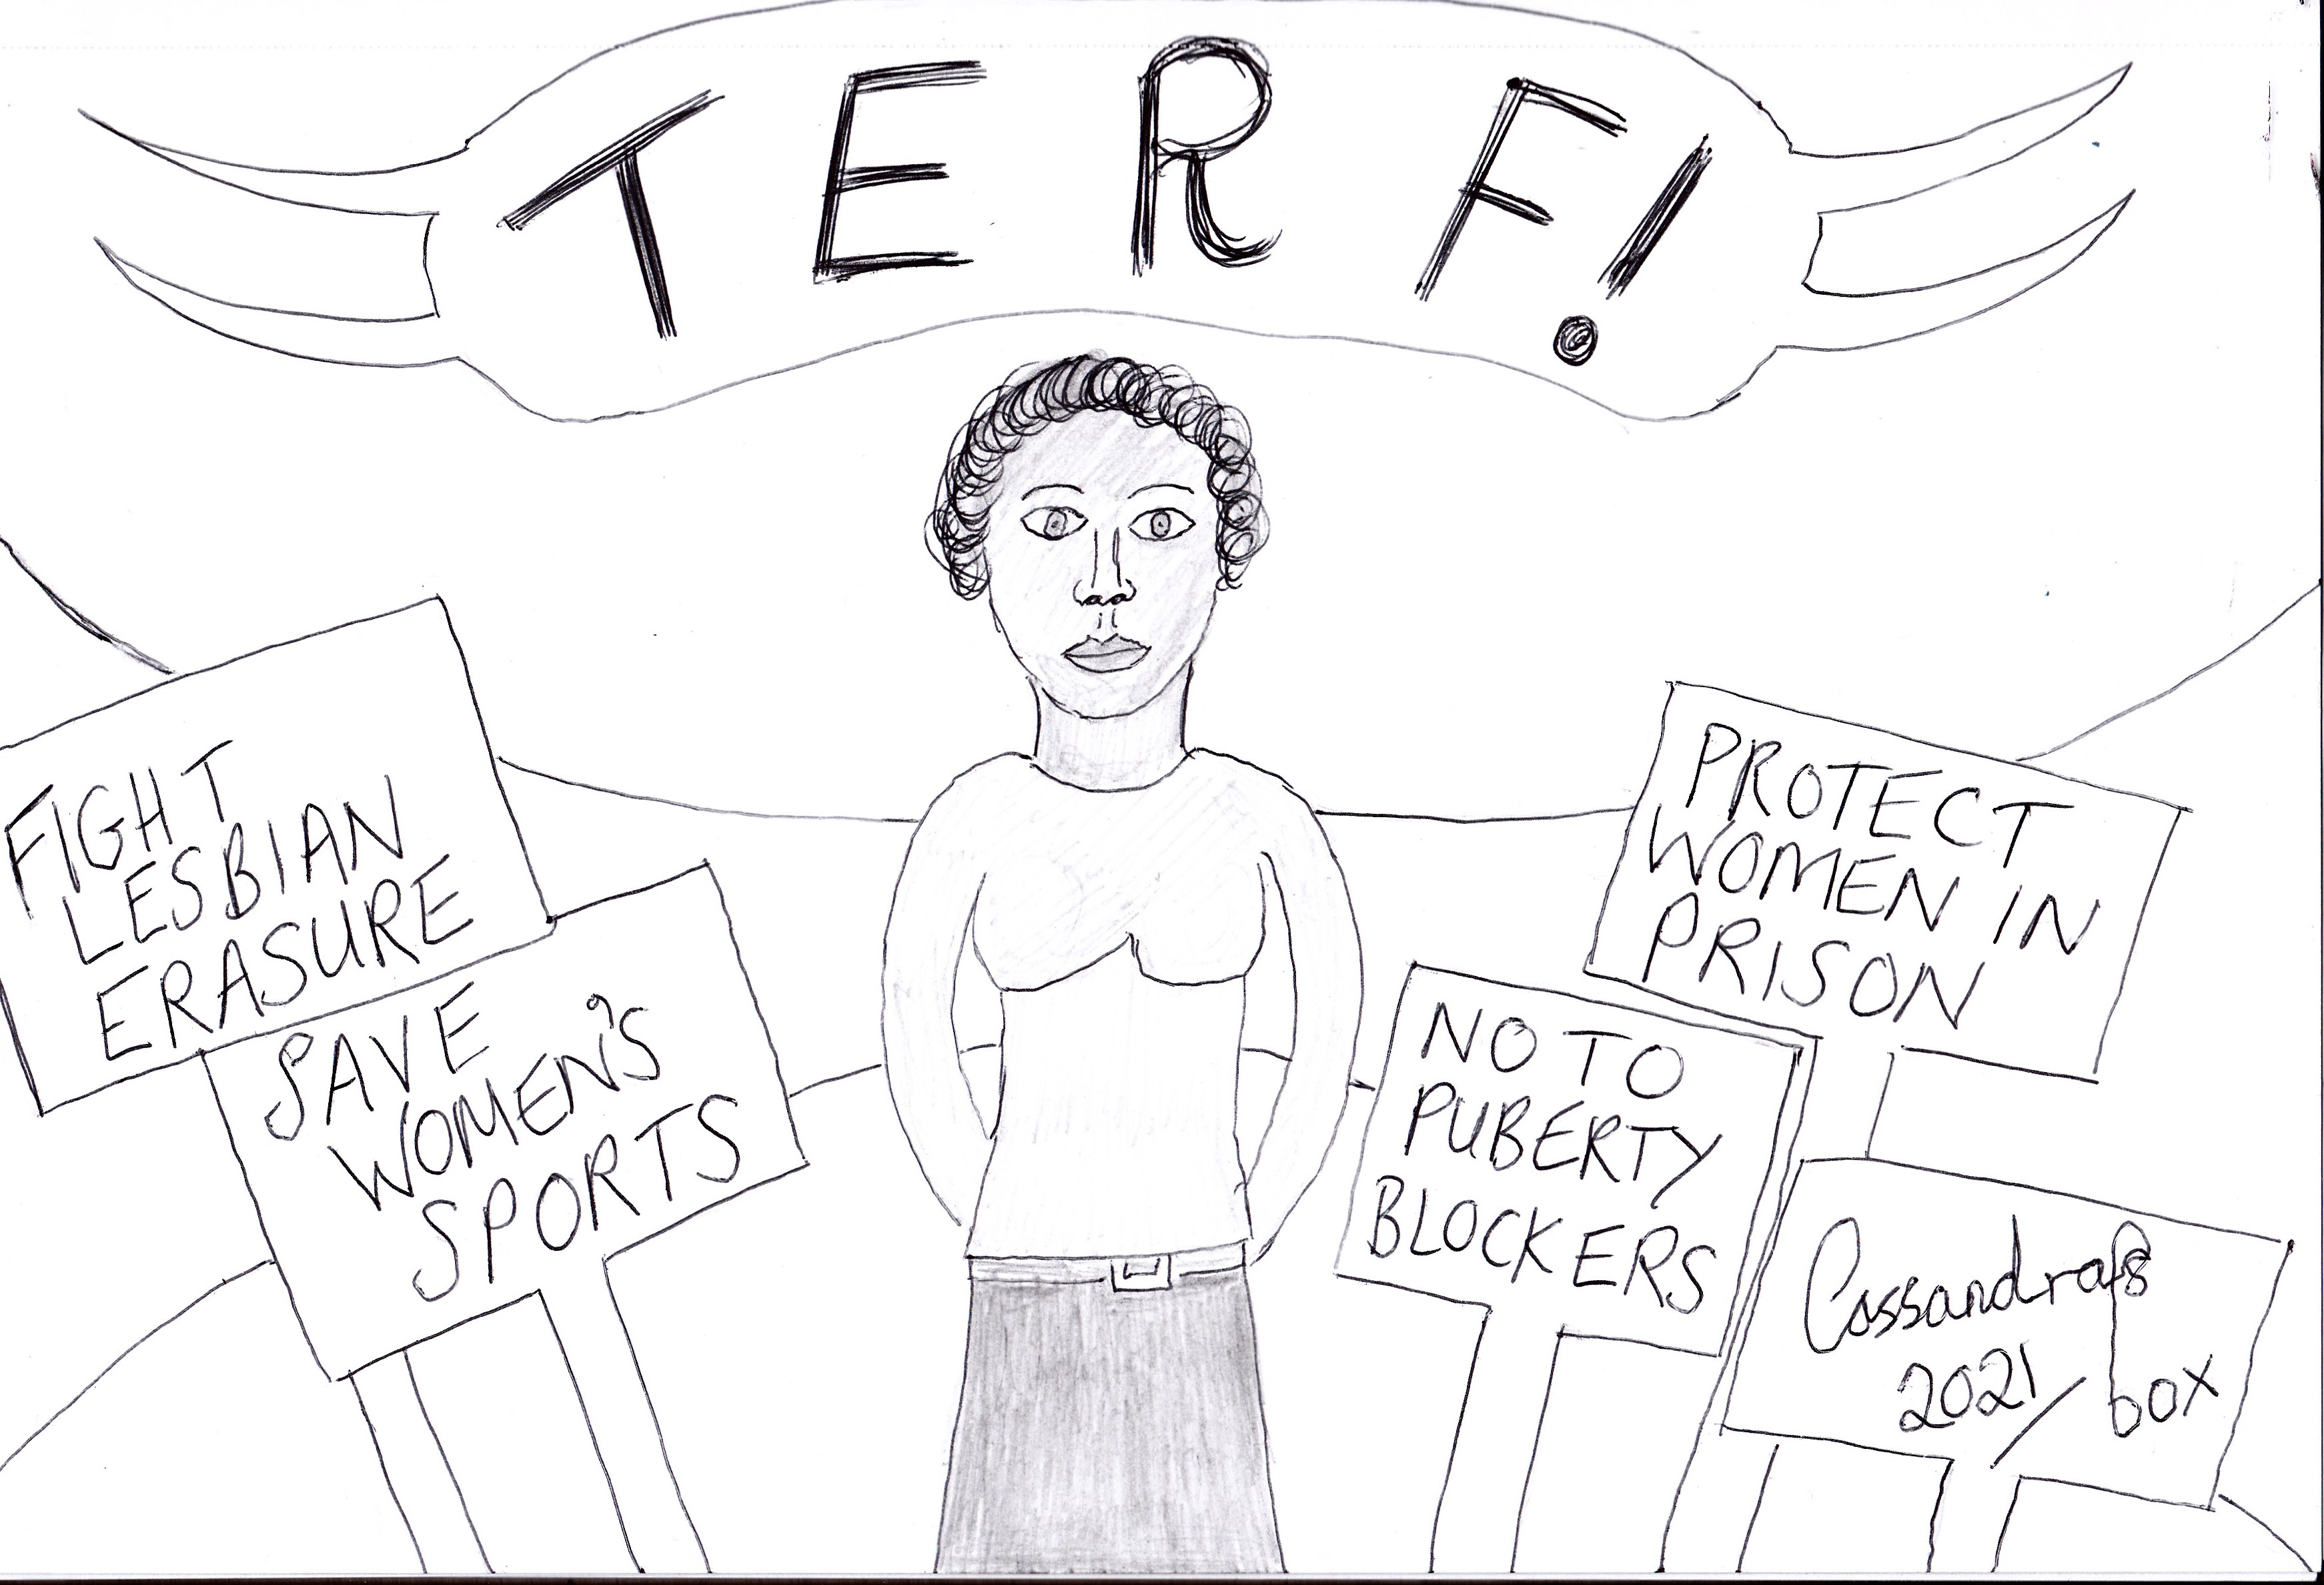 Cartoon: woman standing in foreground. Signs read Fight lesbian erasure, Save women's sports, no to puberty blockers, protect women in prison. Text above her head reads TERF!